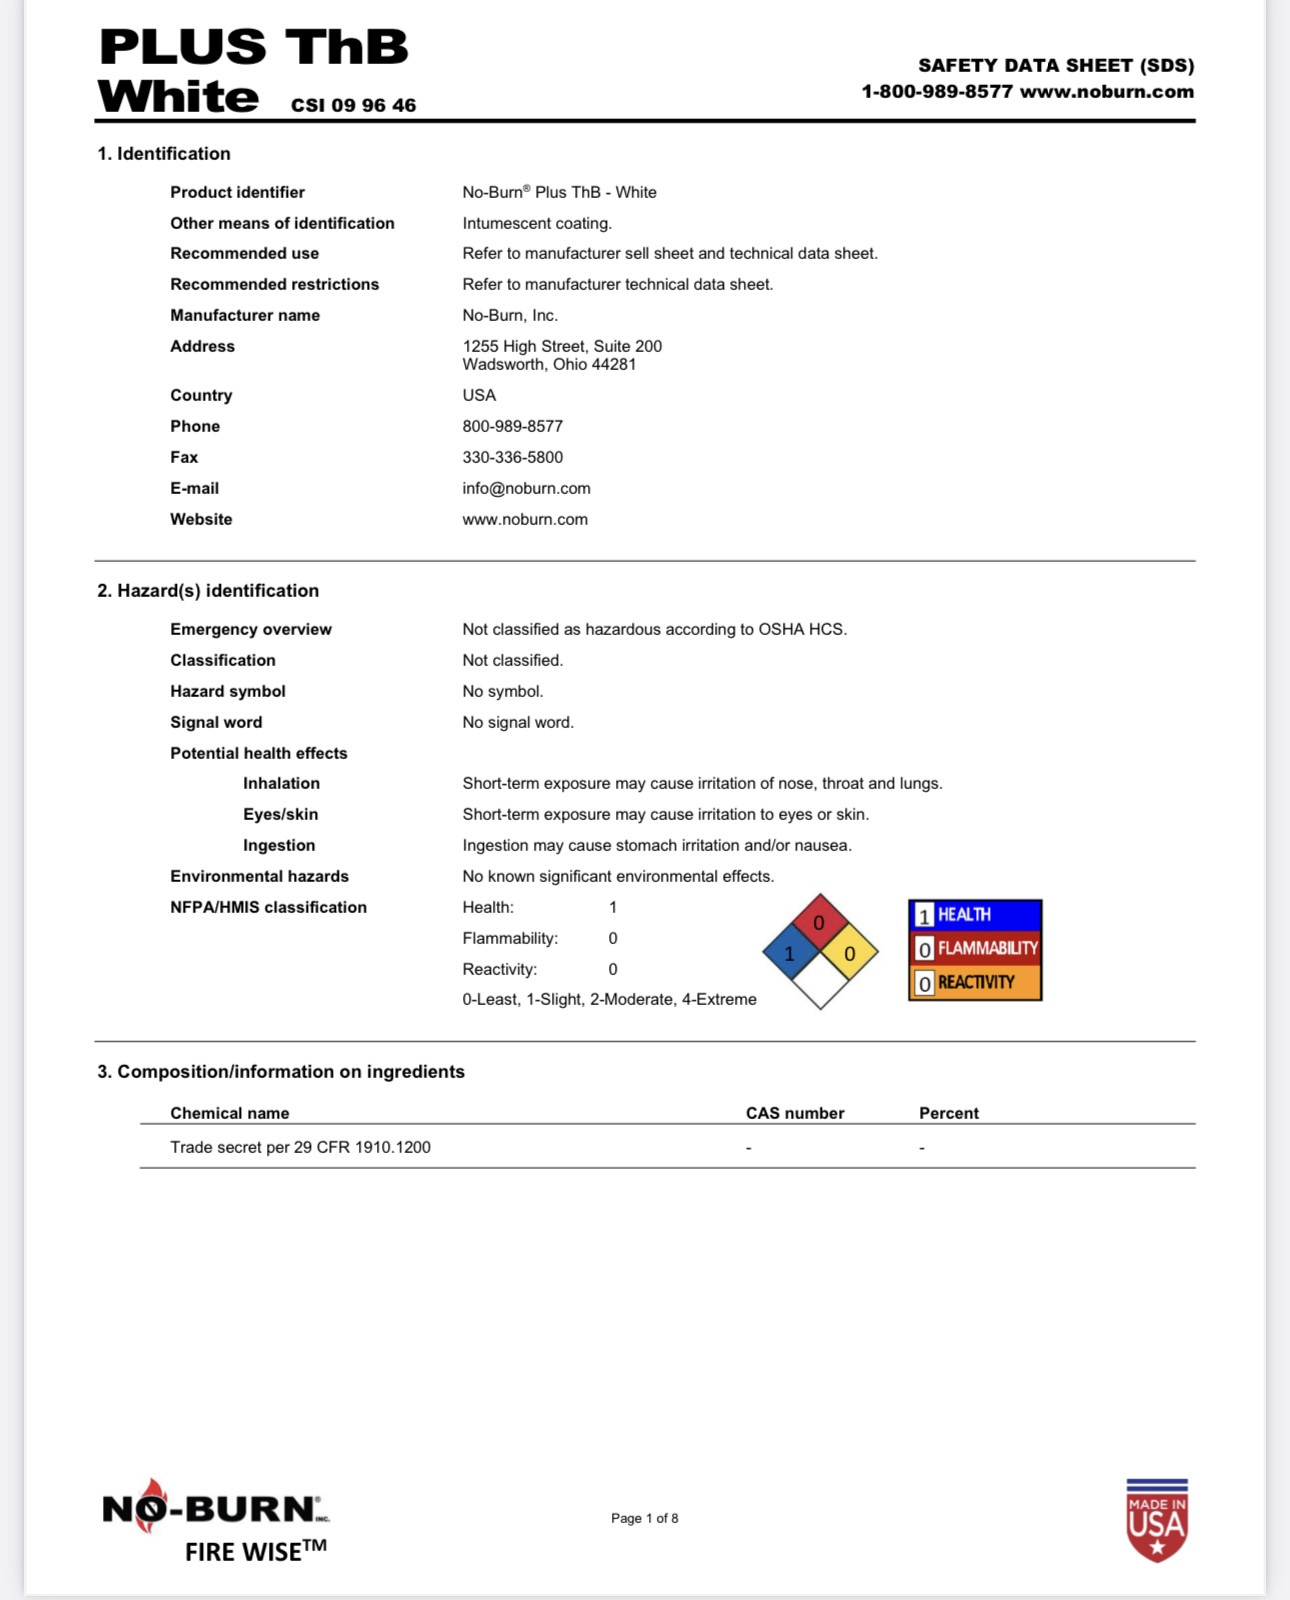 No-Burn Intumescent  Coating Plus ThB White Safety Data Sheet ( SDS)